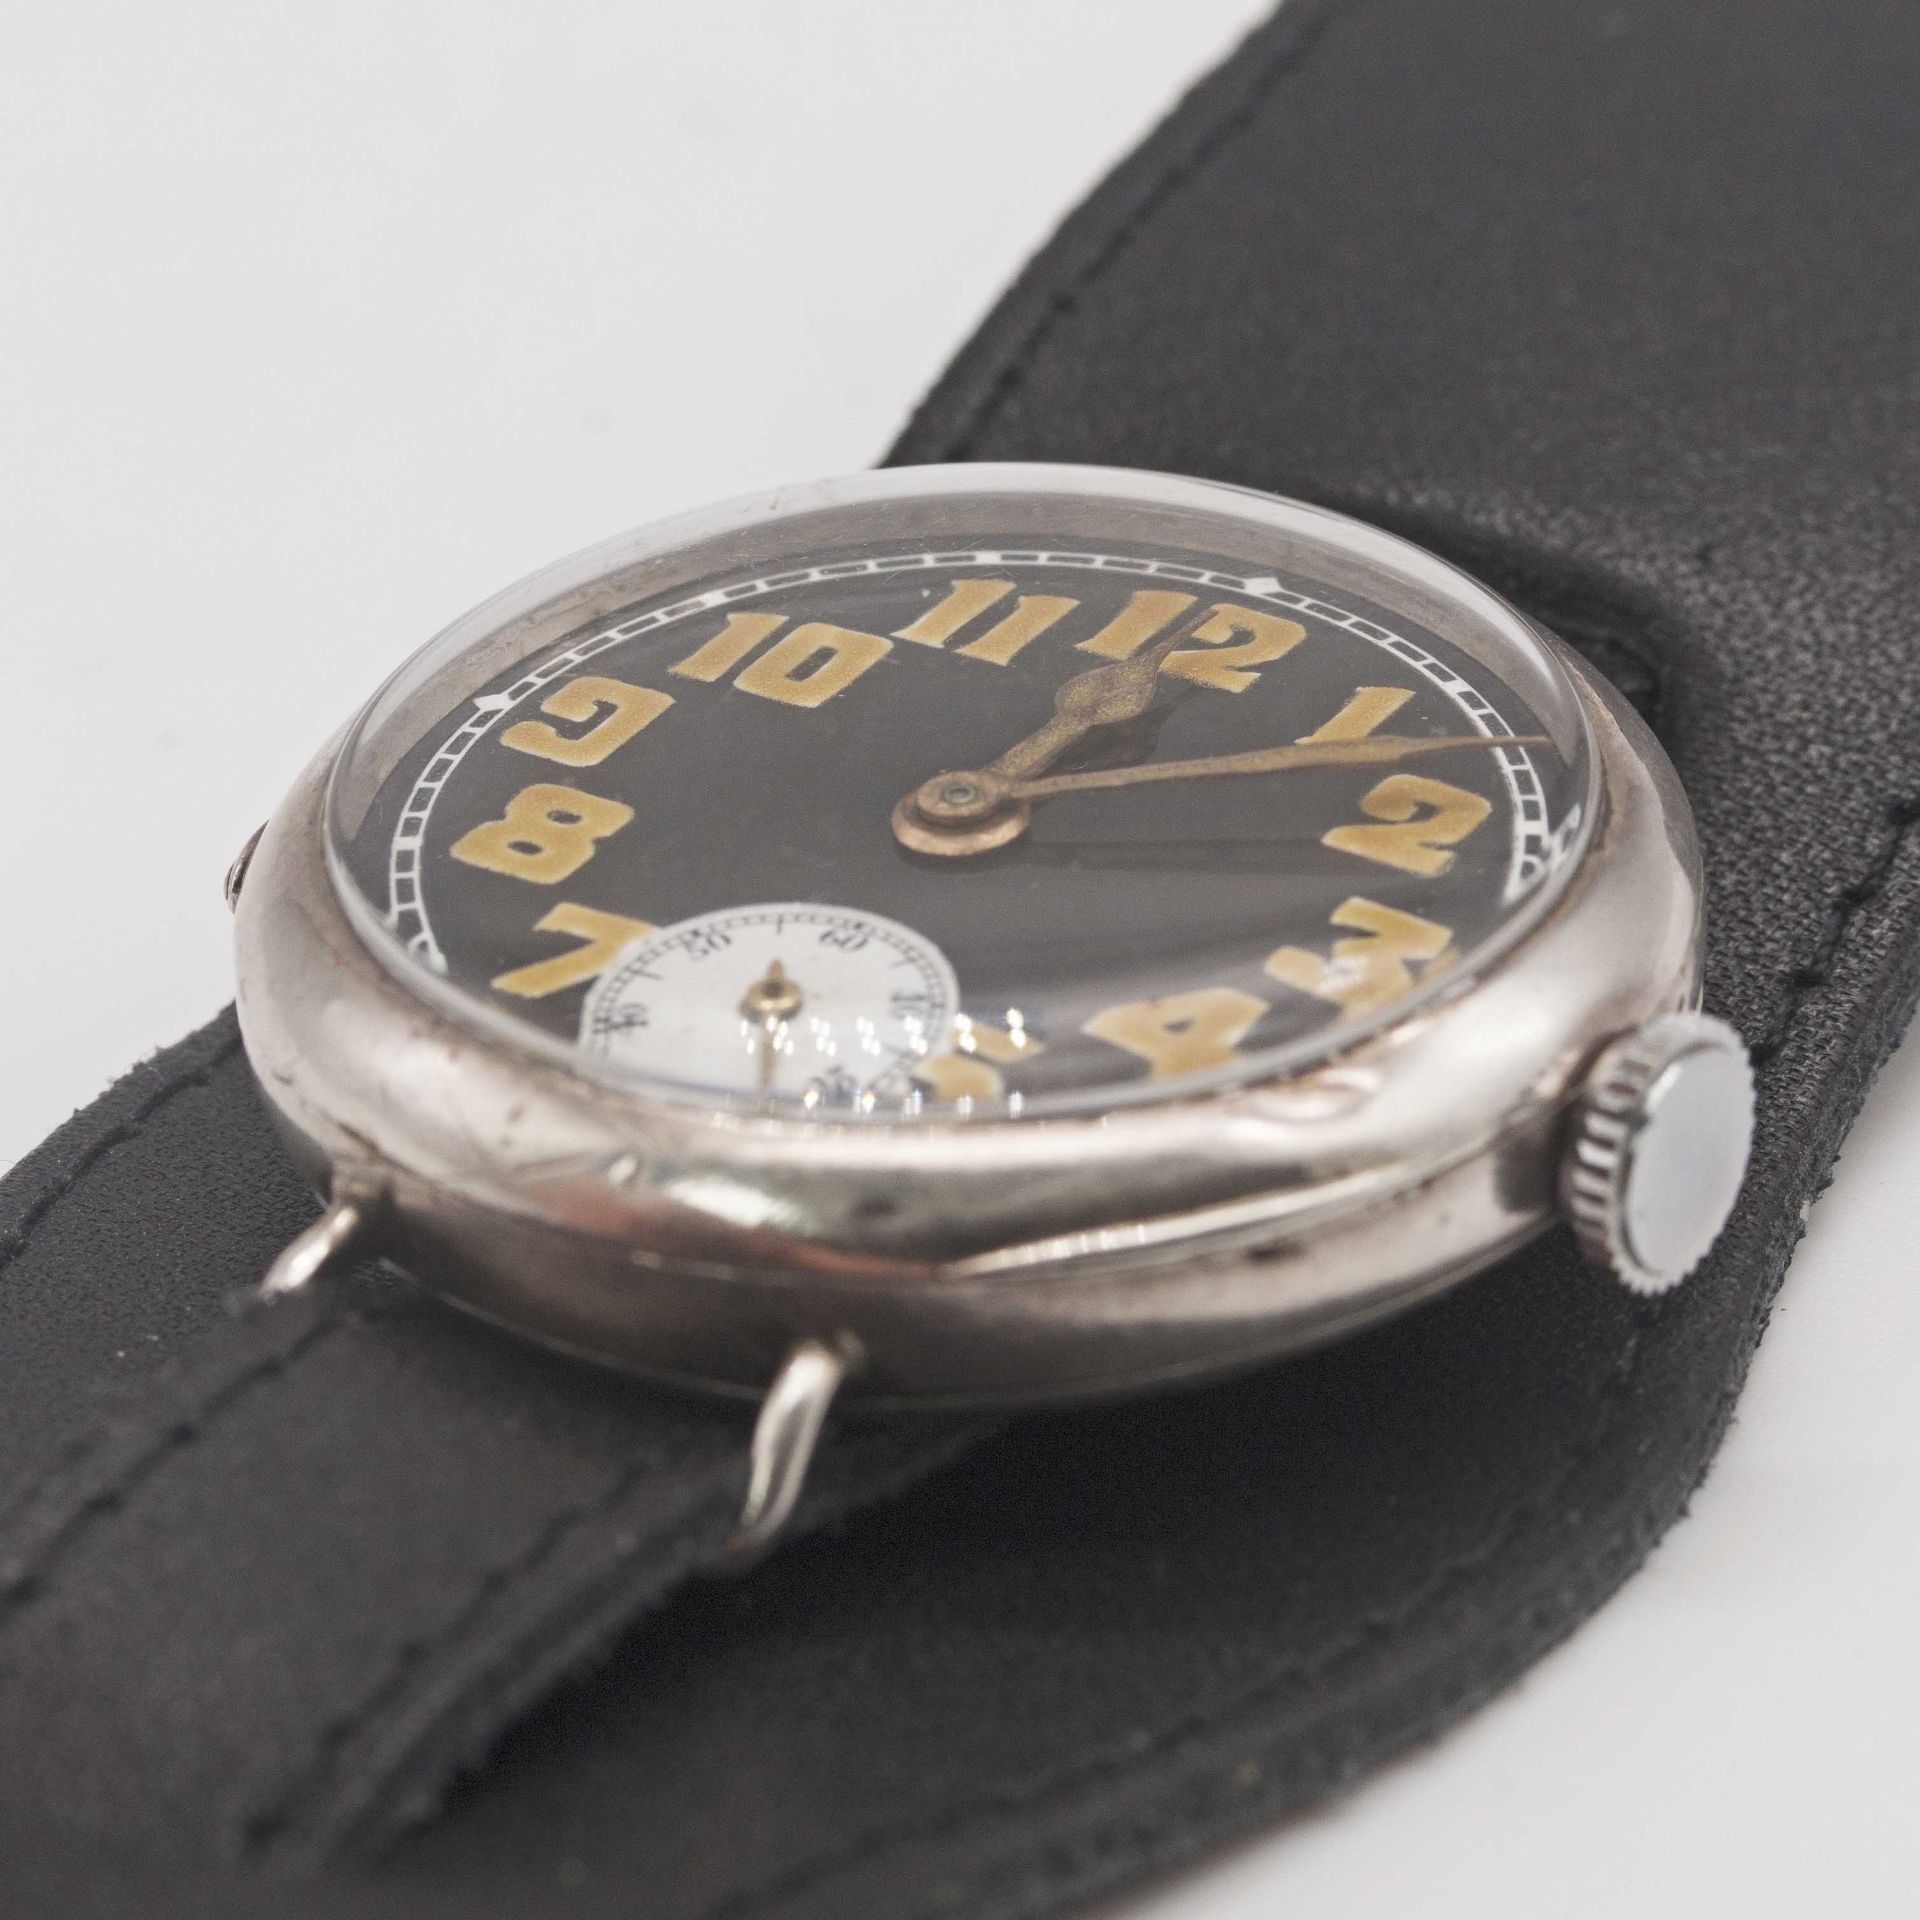 A GENTLEMAN'S SOLID SILVER ROLEX OFFICERS WRIST WATCH CIRCA 1918, WITH BLACK ENAMEL DIAL & CATHEDRAL - Image 3 of 10